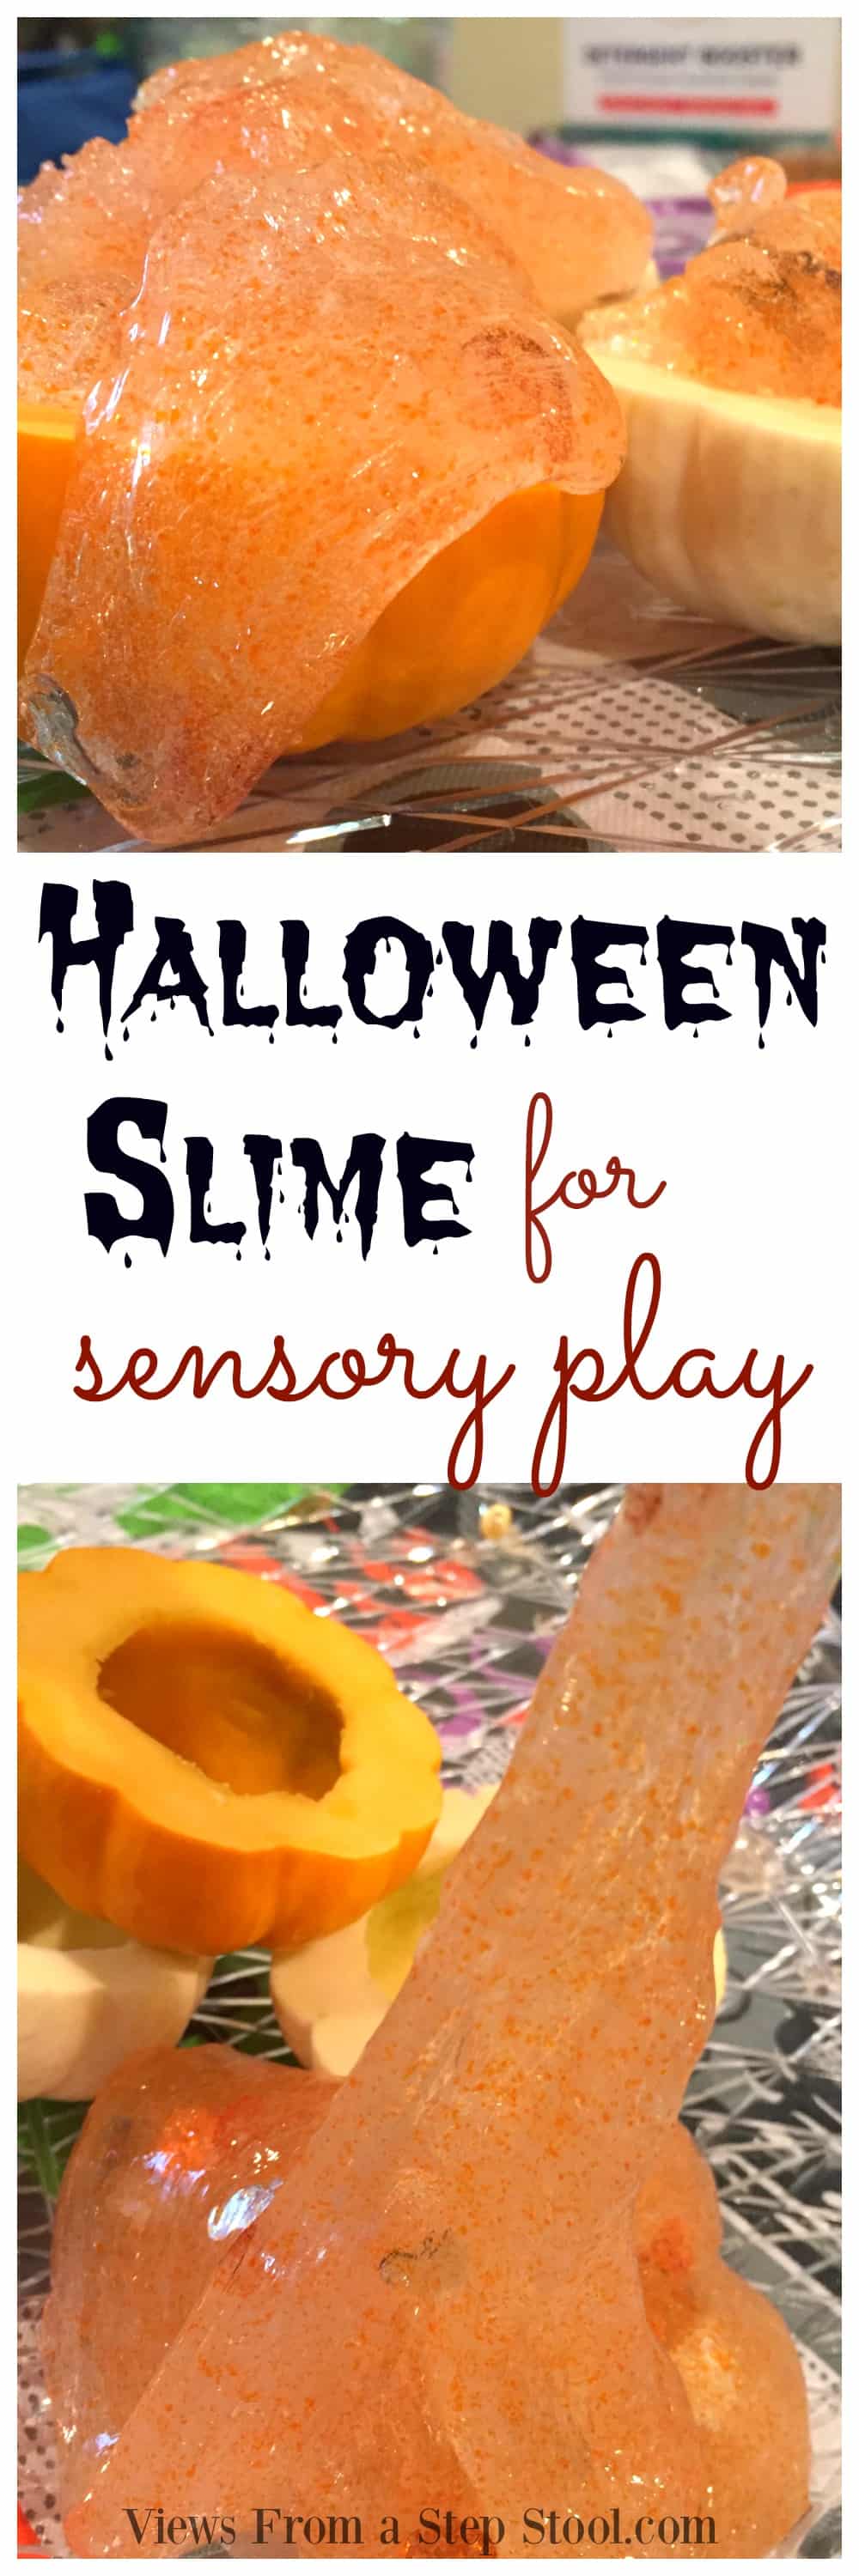 This halloween slime is so fun to make AND play with! The perfect seasonal boredom buster to get your kids excited about Halloween.